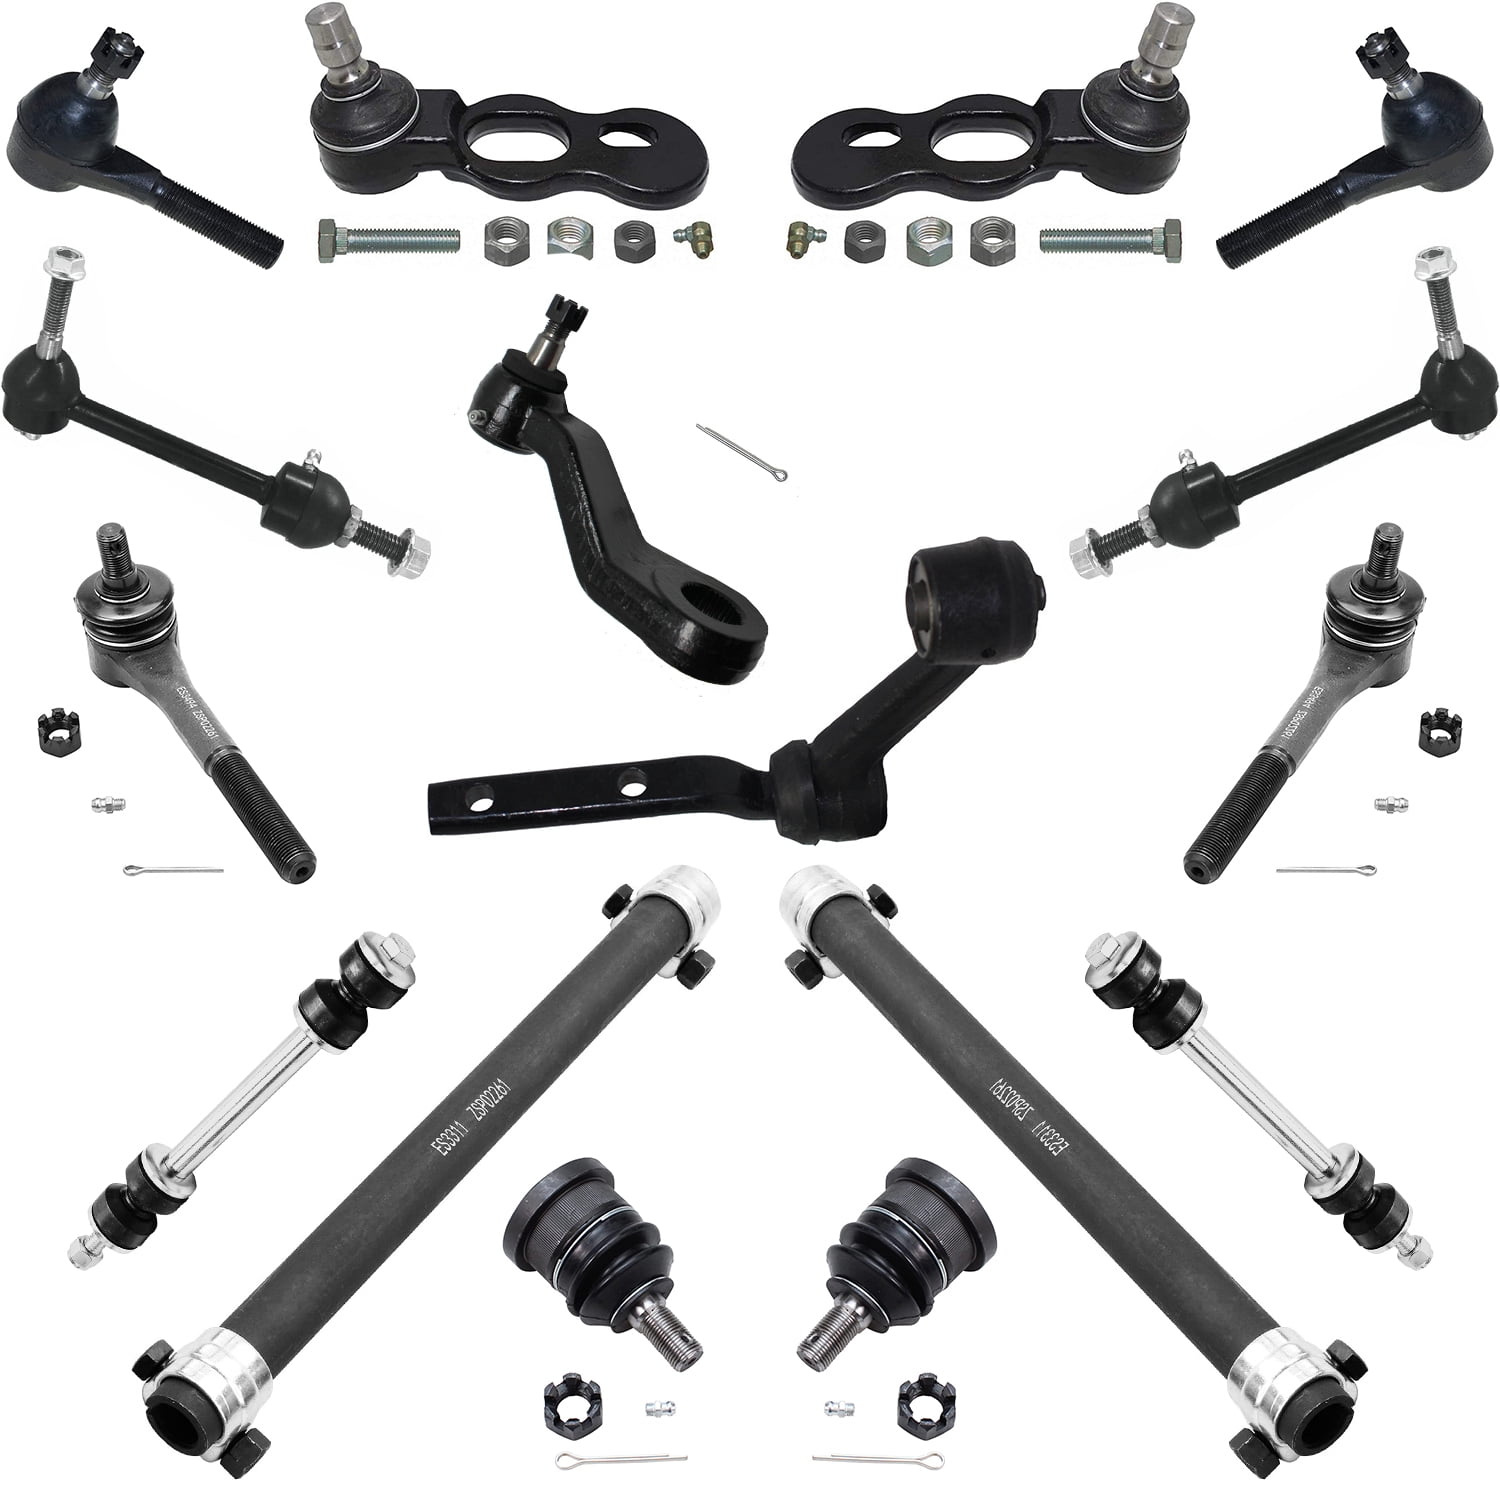 PartsW 10 Pc New Suspension Kit for Ford Crown Victoria/Lincoln Town Car/Mercury Grand Marquis/Upper & Lower Ball Joints Sway Bar End Link Outer and Inner Tie Rod End